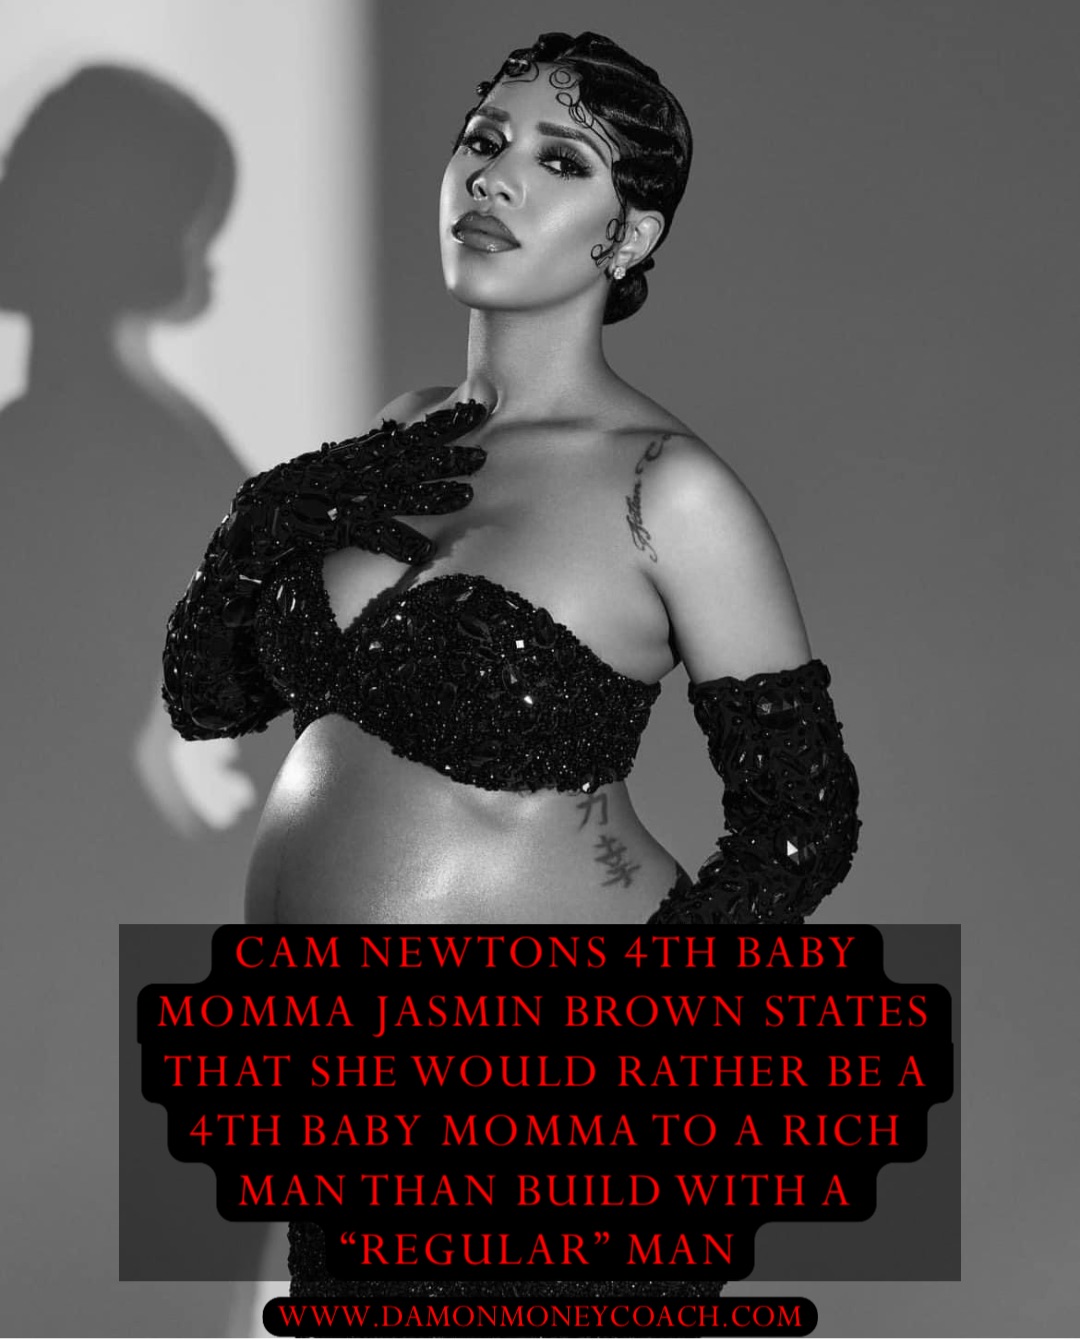 Cam Newtons 4th baby momma Jasmin Brown states that she would rather be a 4th baby momma to a rich man than build with a “regular” man www.damonmoneycoach.com